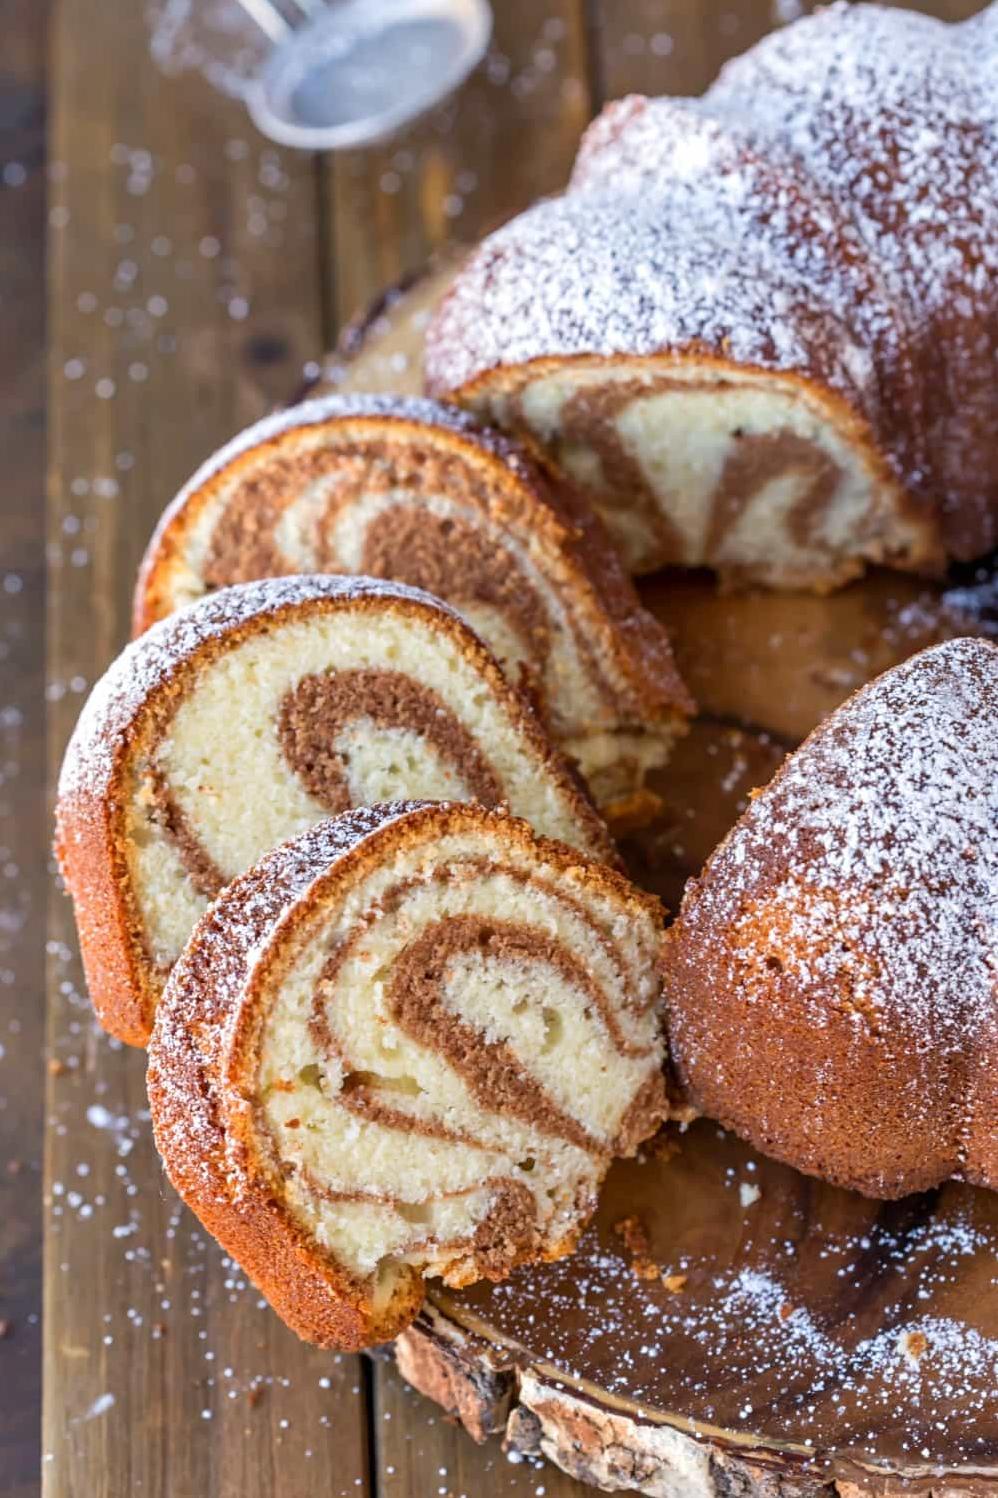  The perfect pairing of cinnamon and almonds makes this pound cake irresistible.